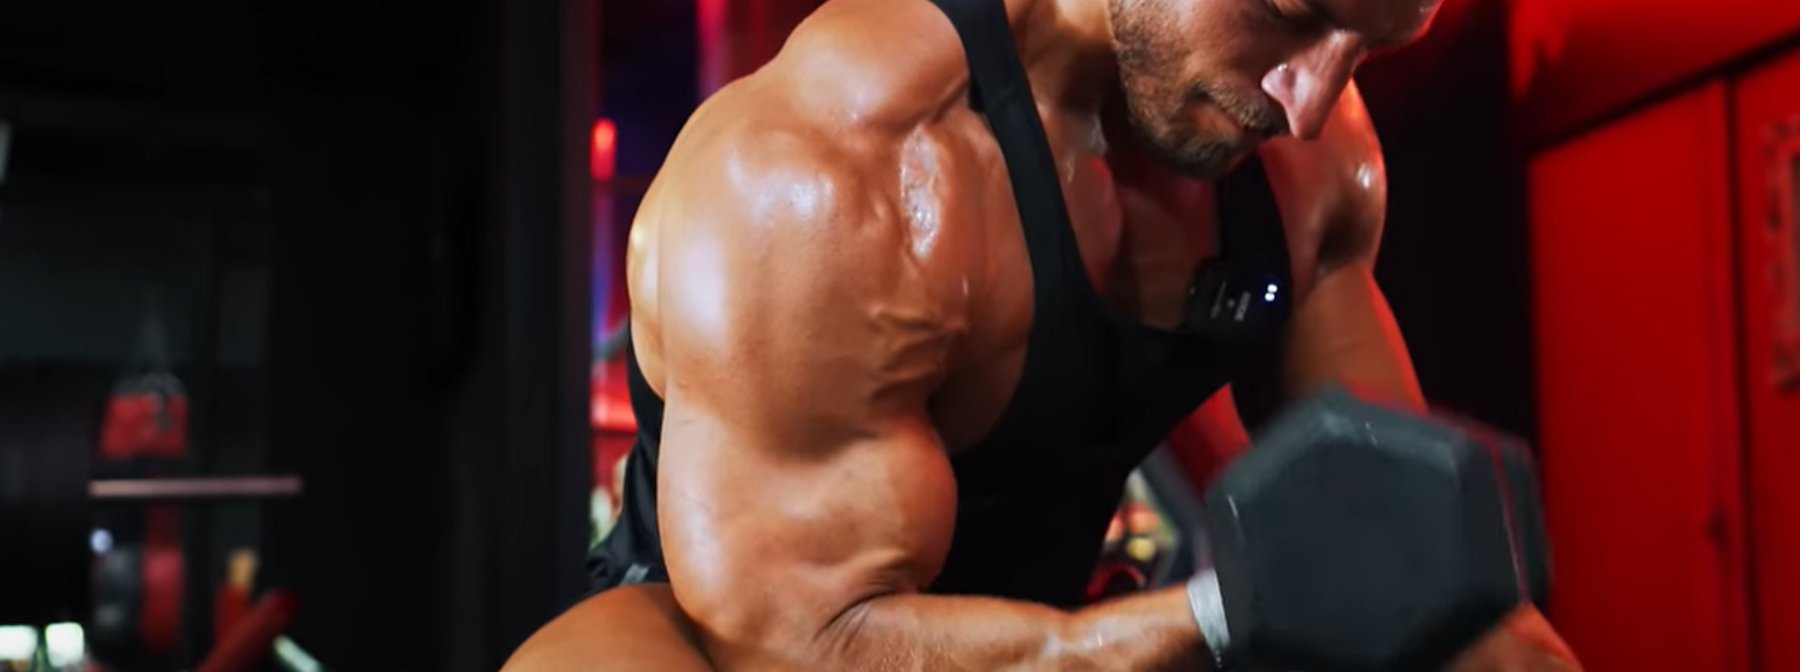 Mike Thurston Trains With 6X Mr Olympia Winner